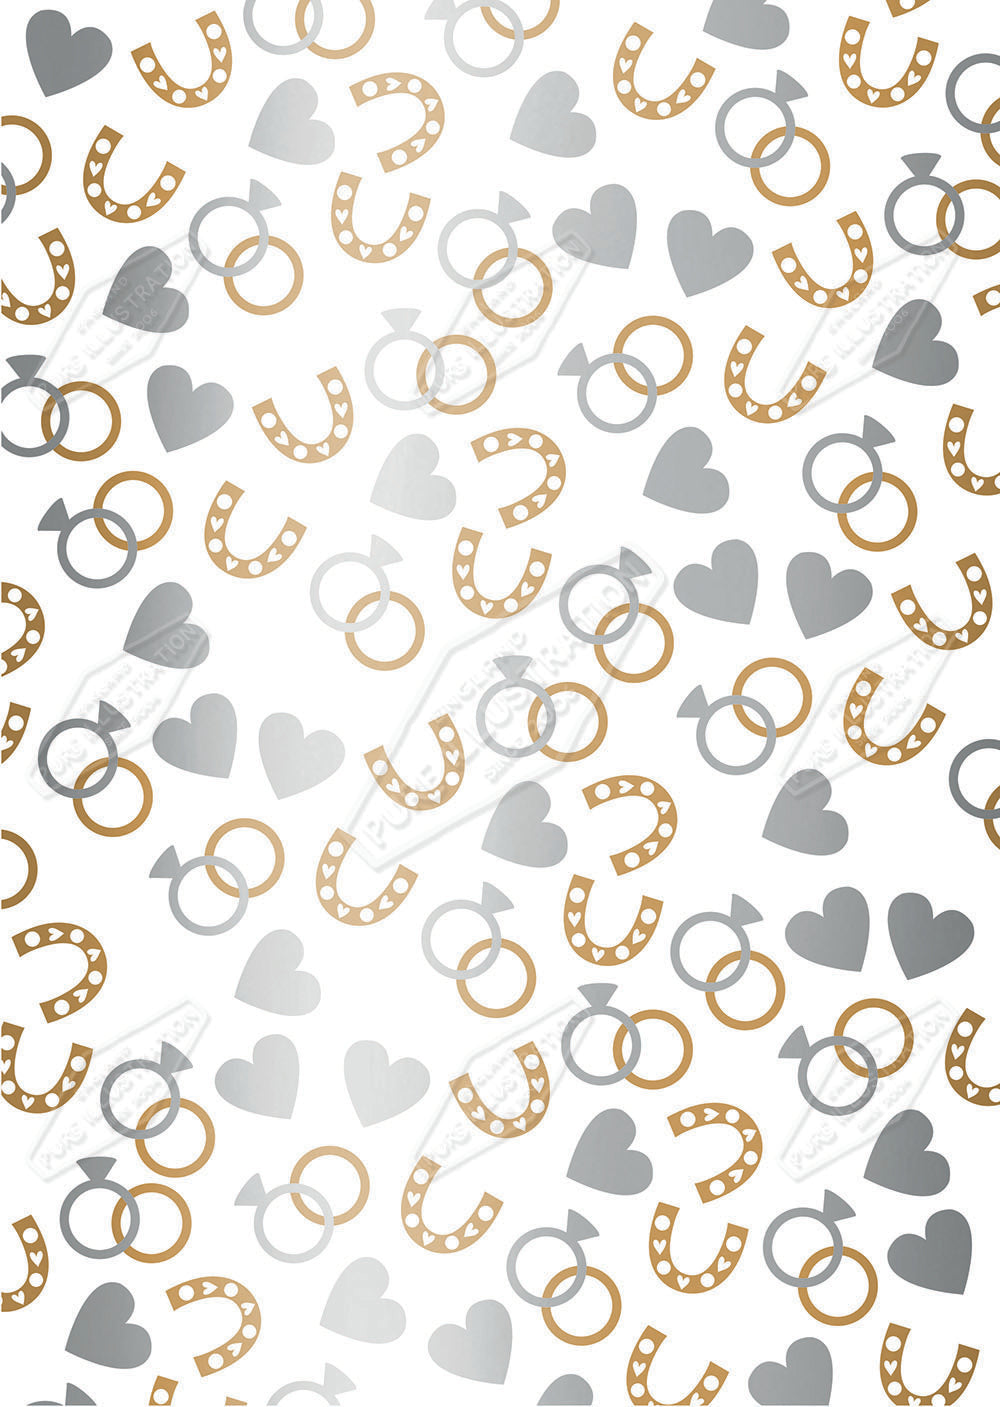 00032227KSP- Kerry Spurling is represented by Pure Art Licensing Agency - Wedding Pattern Design